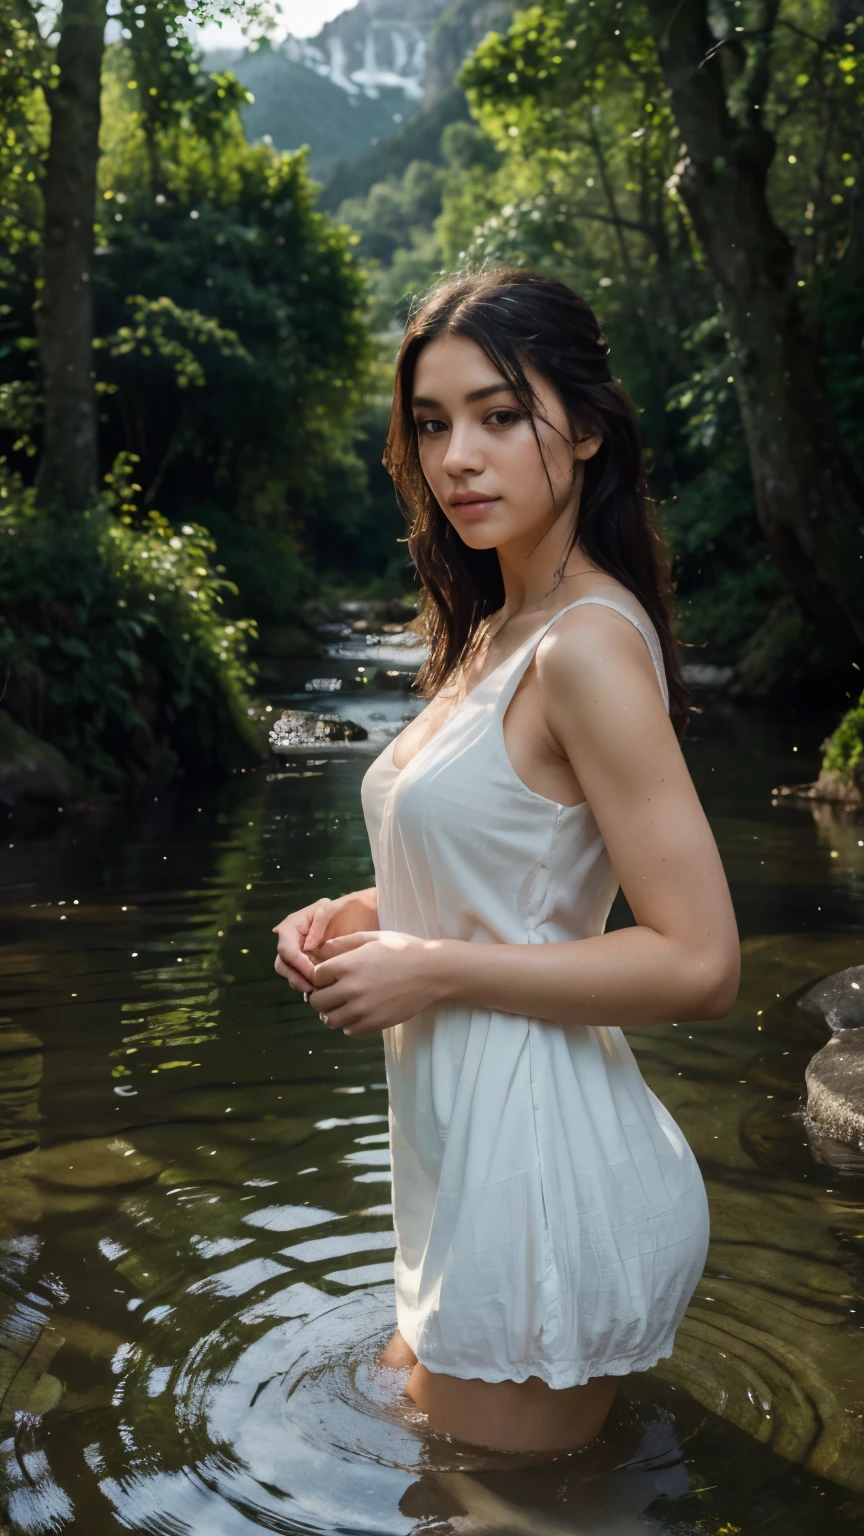 A woman bathing in a river wearing a thin white dress, with mountains in the background.
(best quality,4k,8k,highres,masterpiece:1.2),ultra-detailed,(realistic,photorealistic,photo-realistic:1.37), HDR, UHD, studio lighting, ultra-fine painting, sharp focus, physically-based rendering, extreme detail description, professional, vivid colors, bokeh, portraits, landscape, nature, serene ambiance, flowing water, lush vegetation, delicate flow of the dress, calm and peaceful expression, realistic water reflections, slight mist in the air, soft natural lighting, sunlight filtering through trees, a sense of tranquility and serenity.